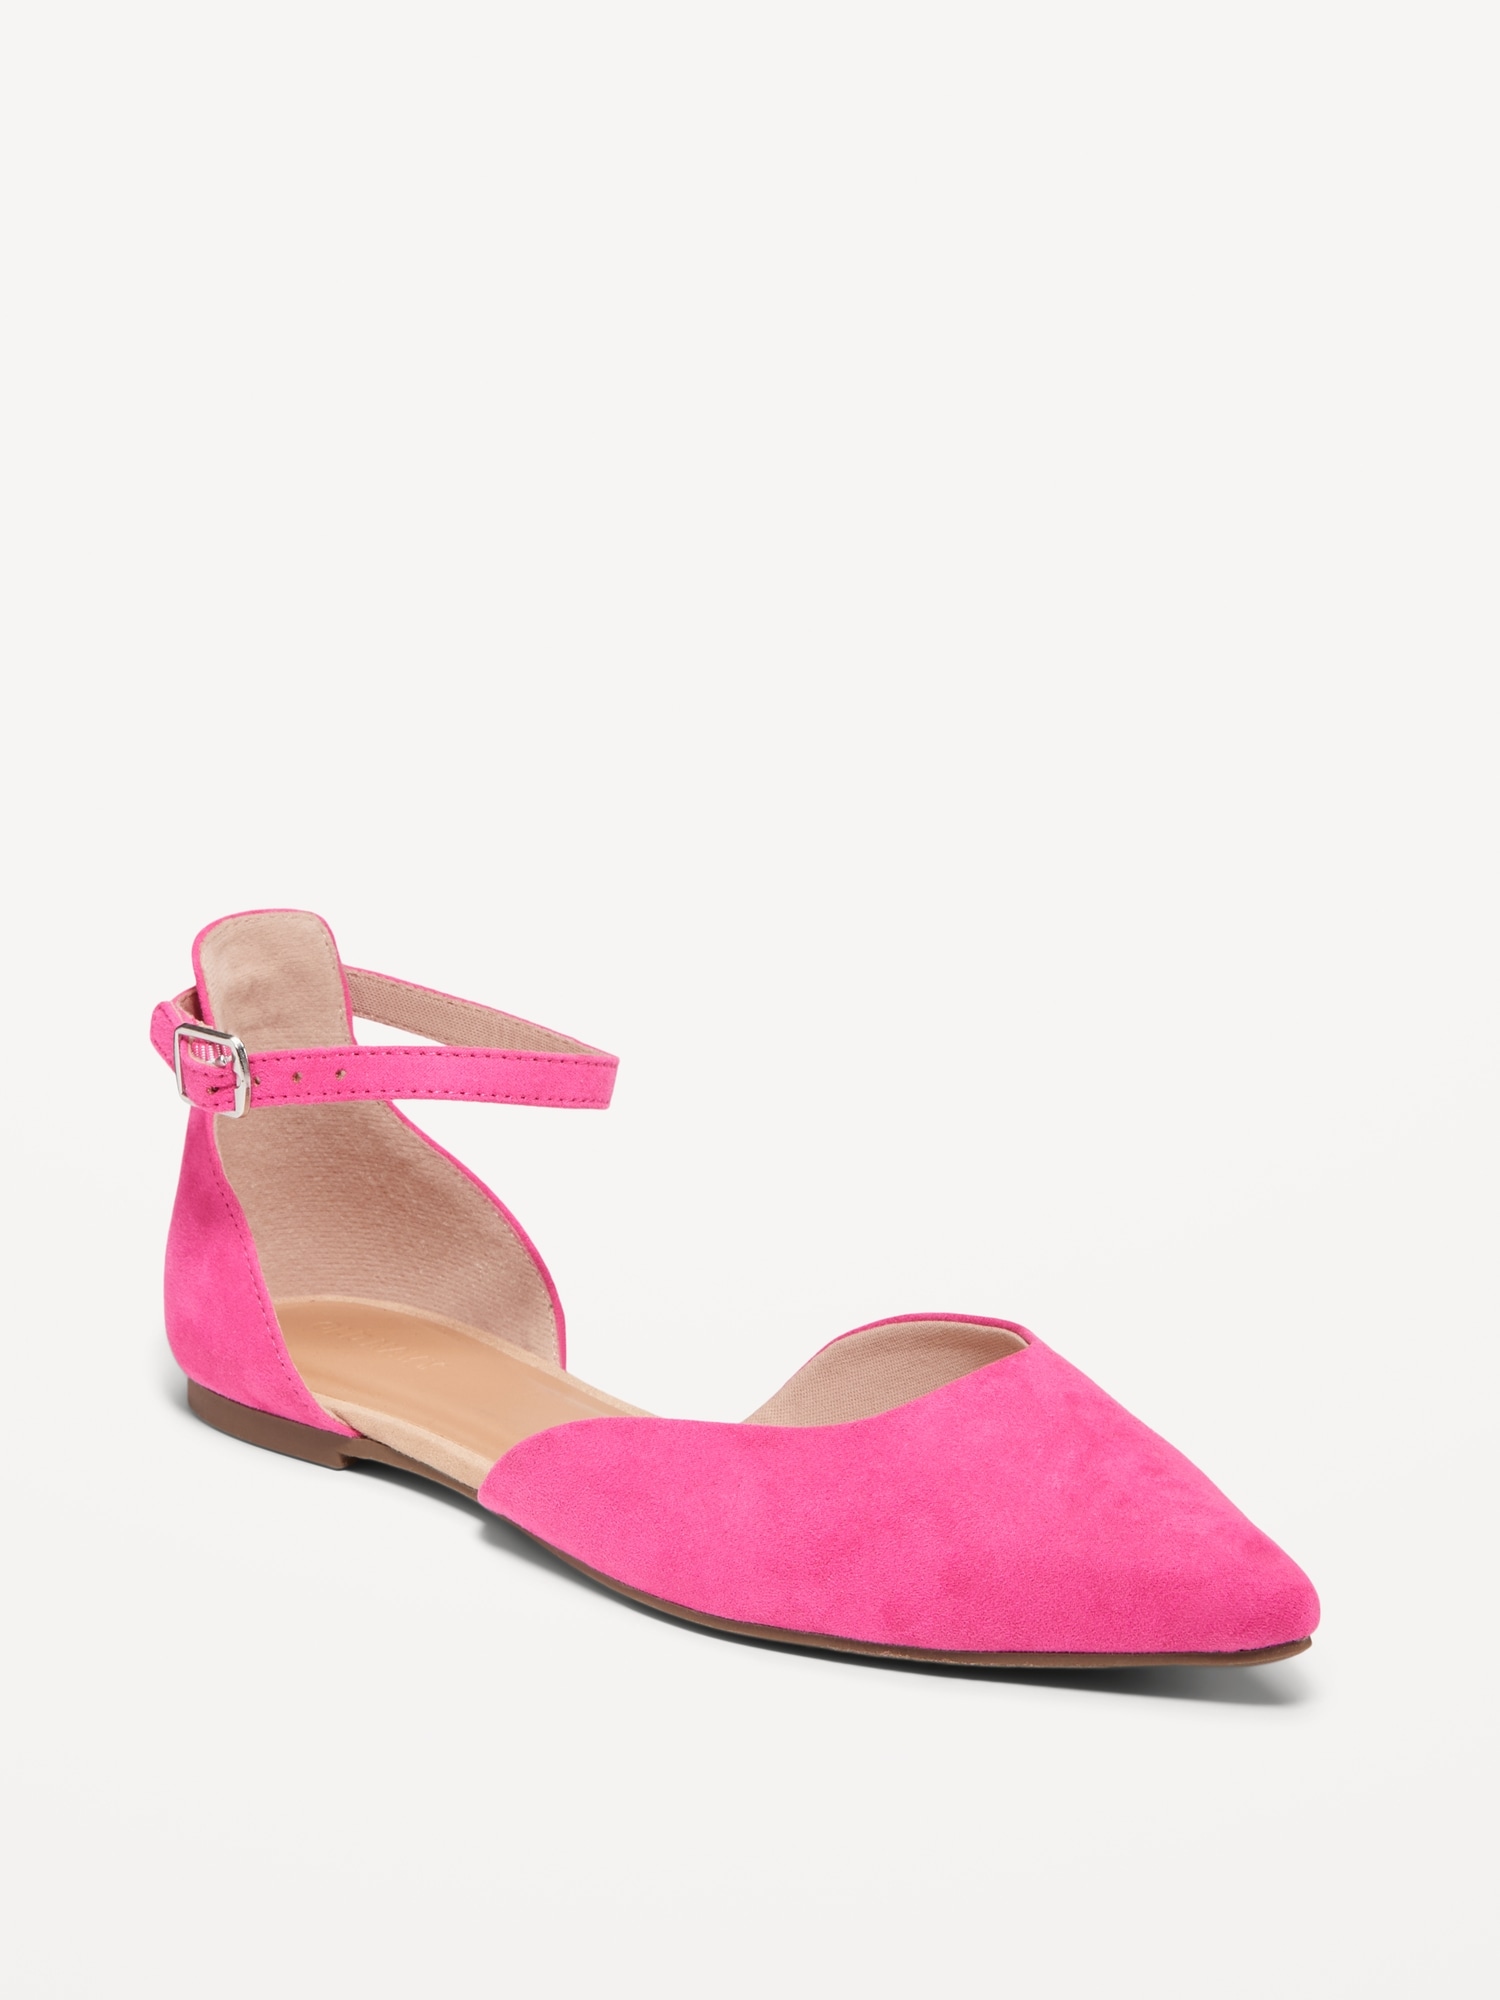 Ankle Strap D'Orsay Flats